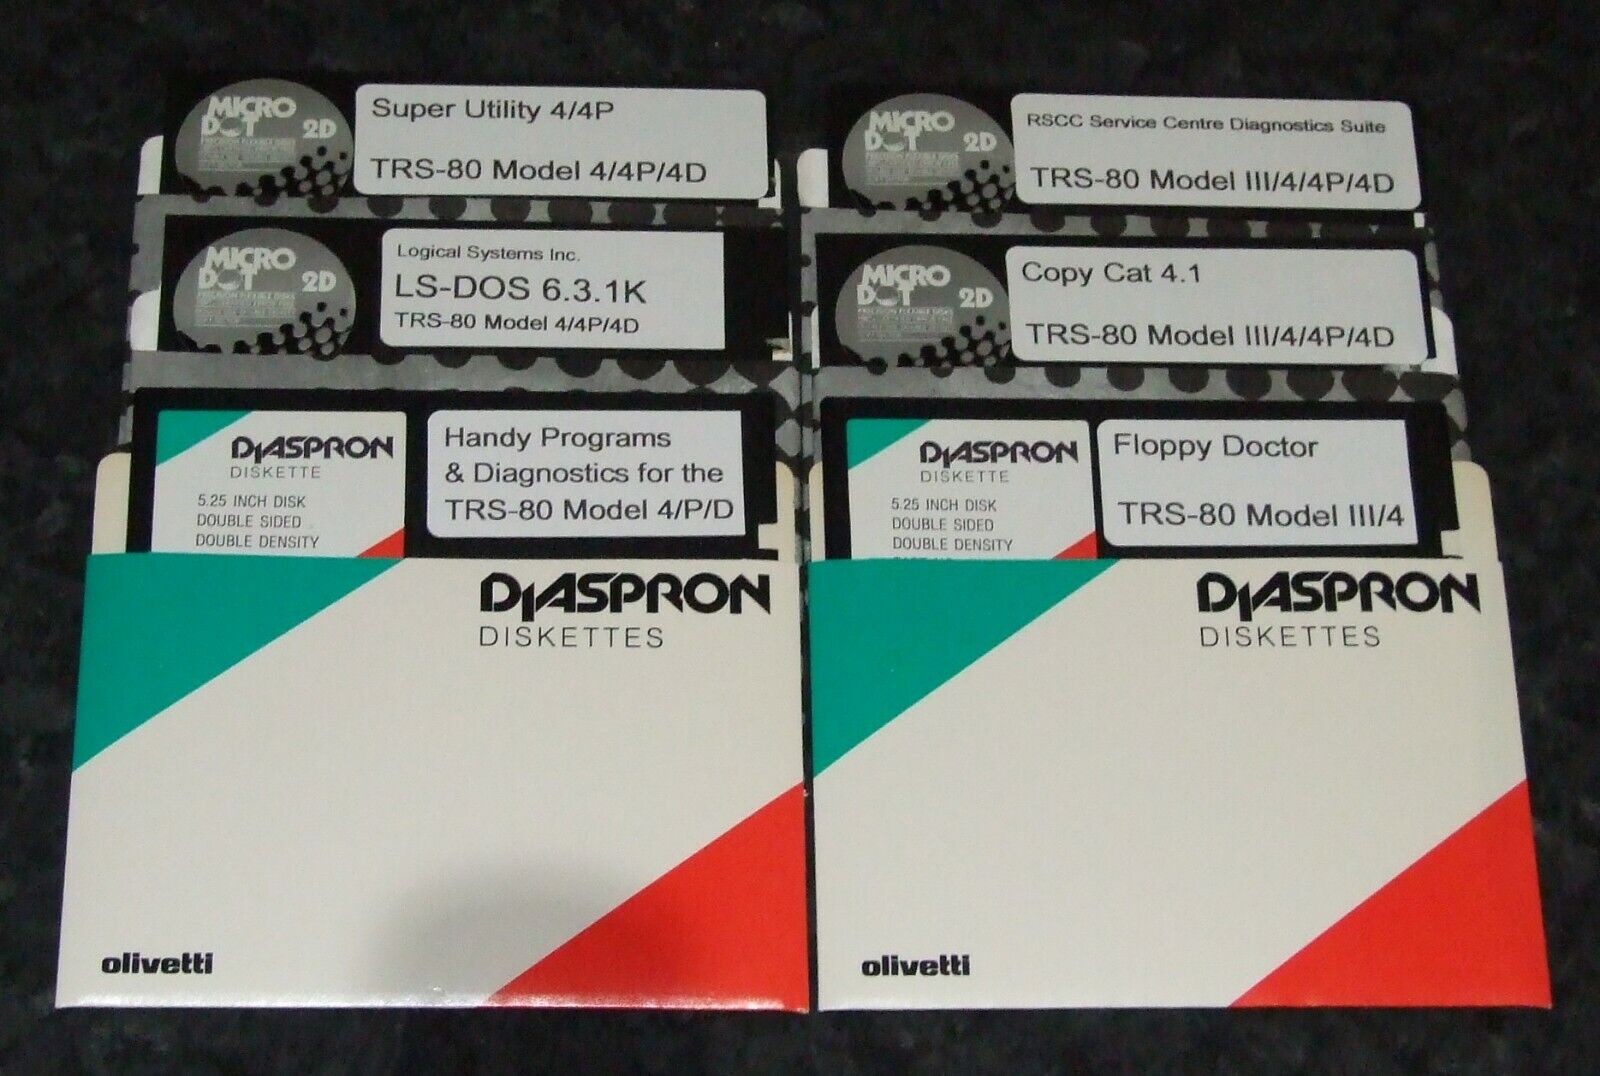 6 Disks of Diagnostics and handy programs for TRS-80 Model 4 restorers repairers